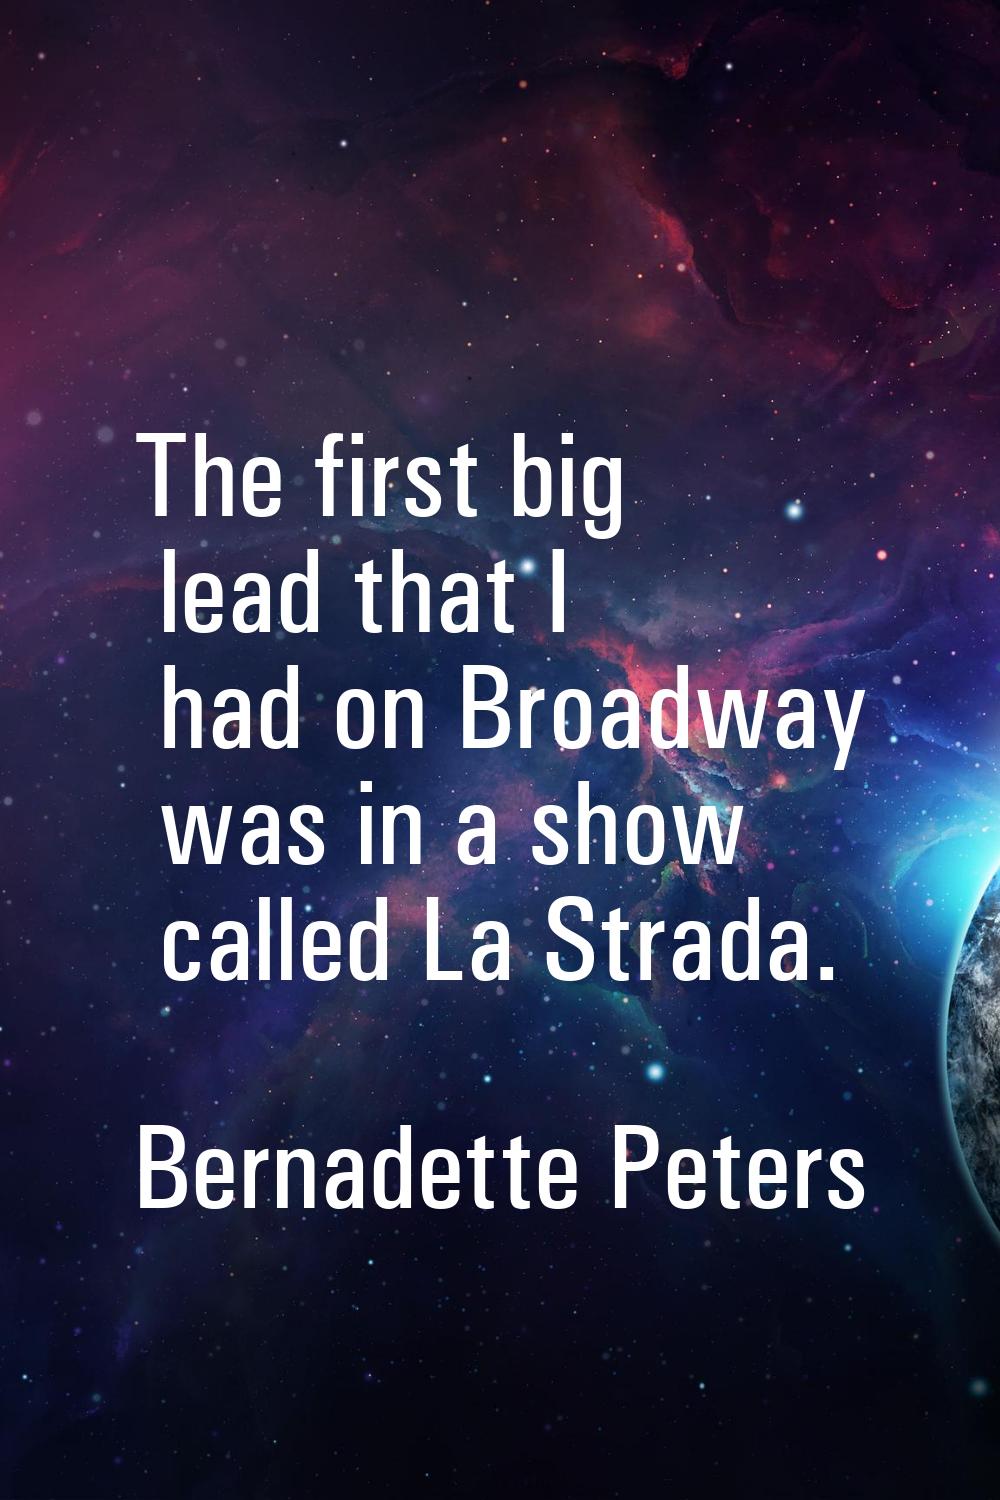 The first big lead that I had on Broadway was in a show called La Strada.